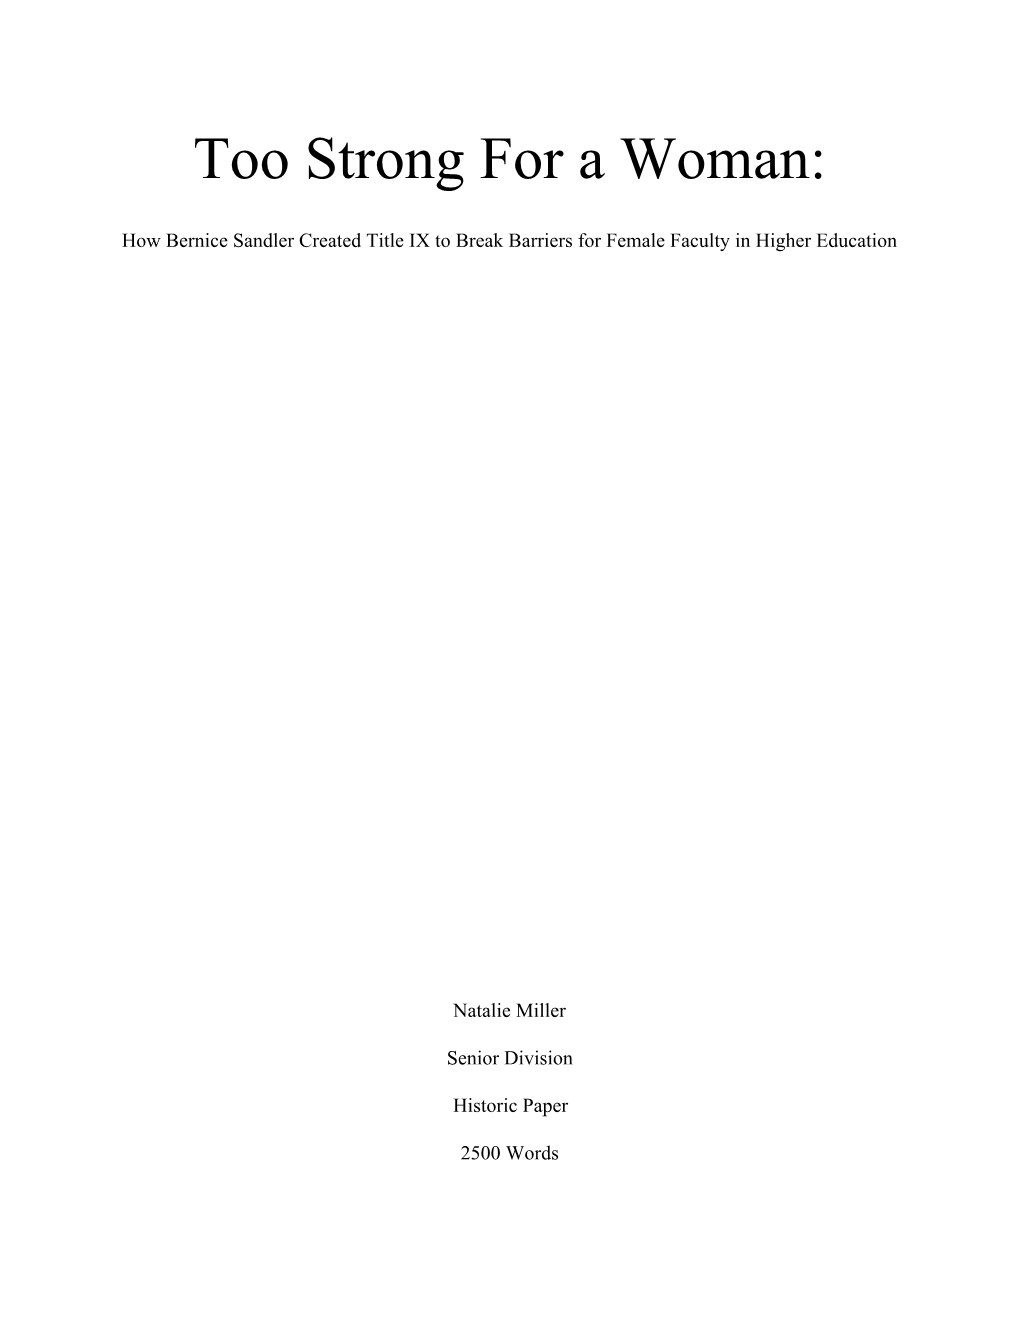 Too Strong for a Woman